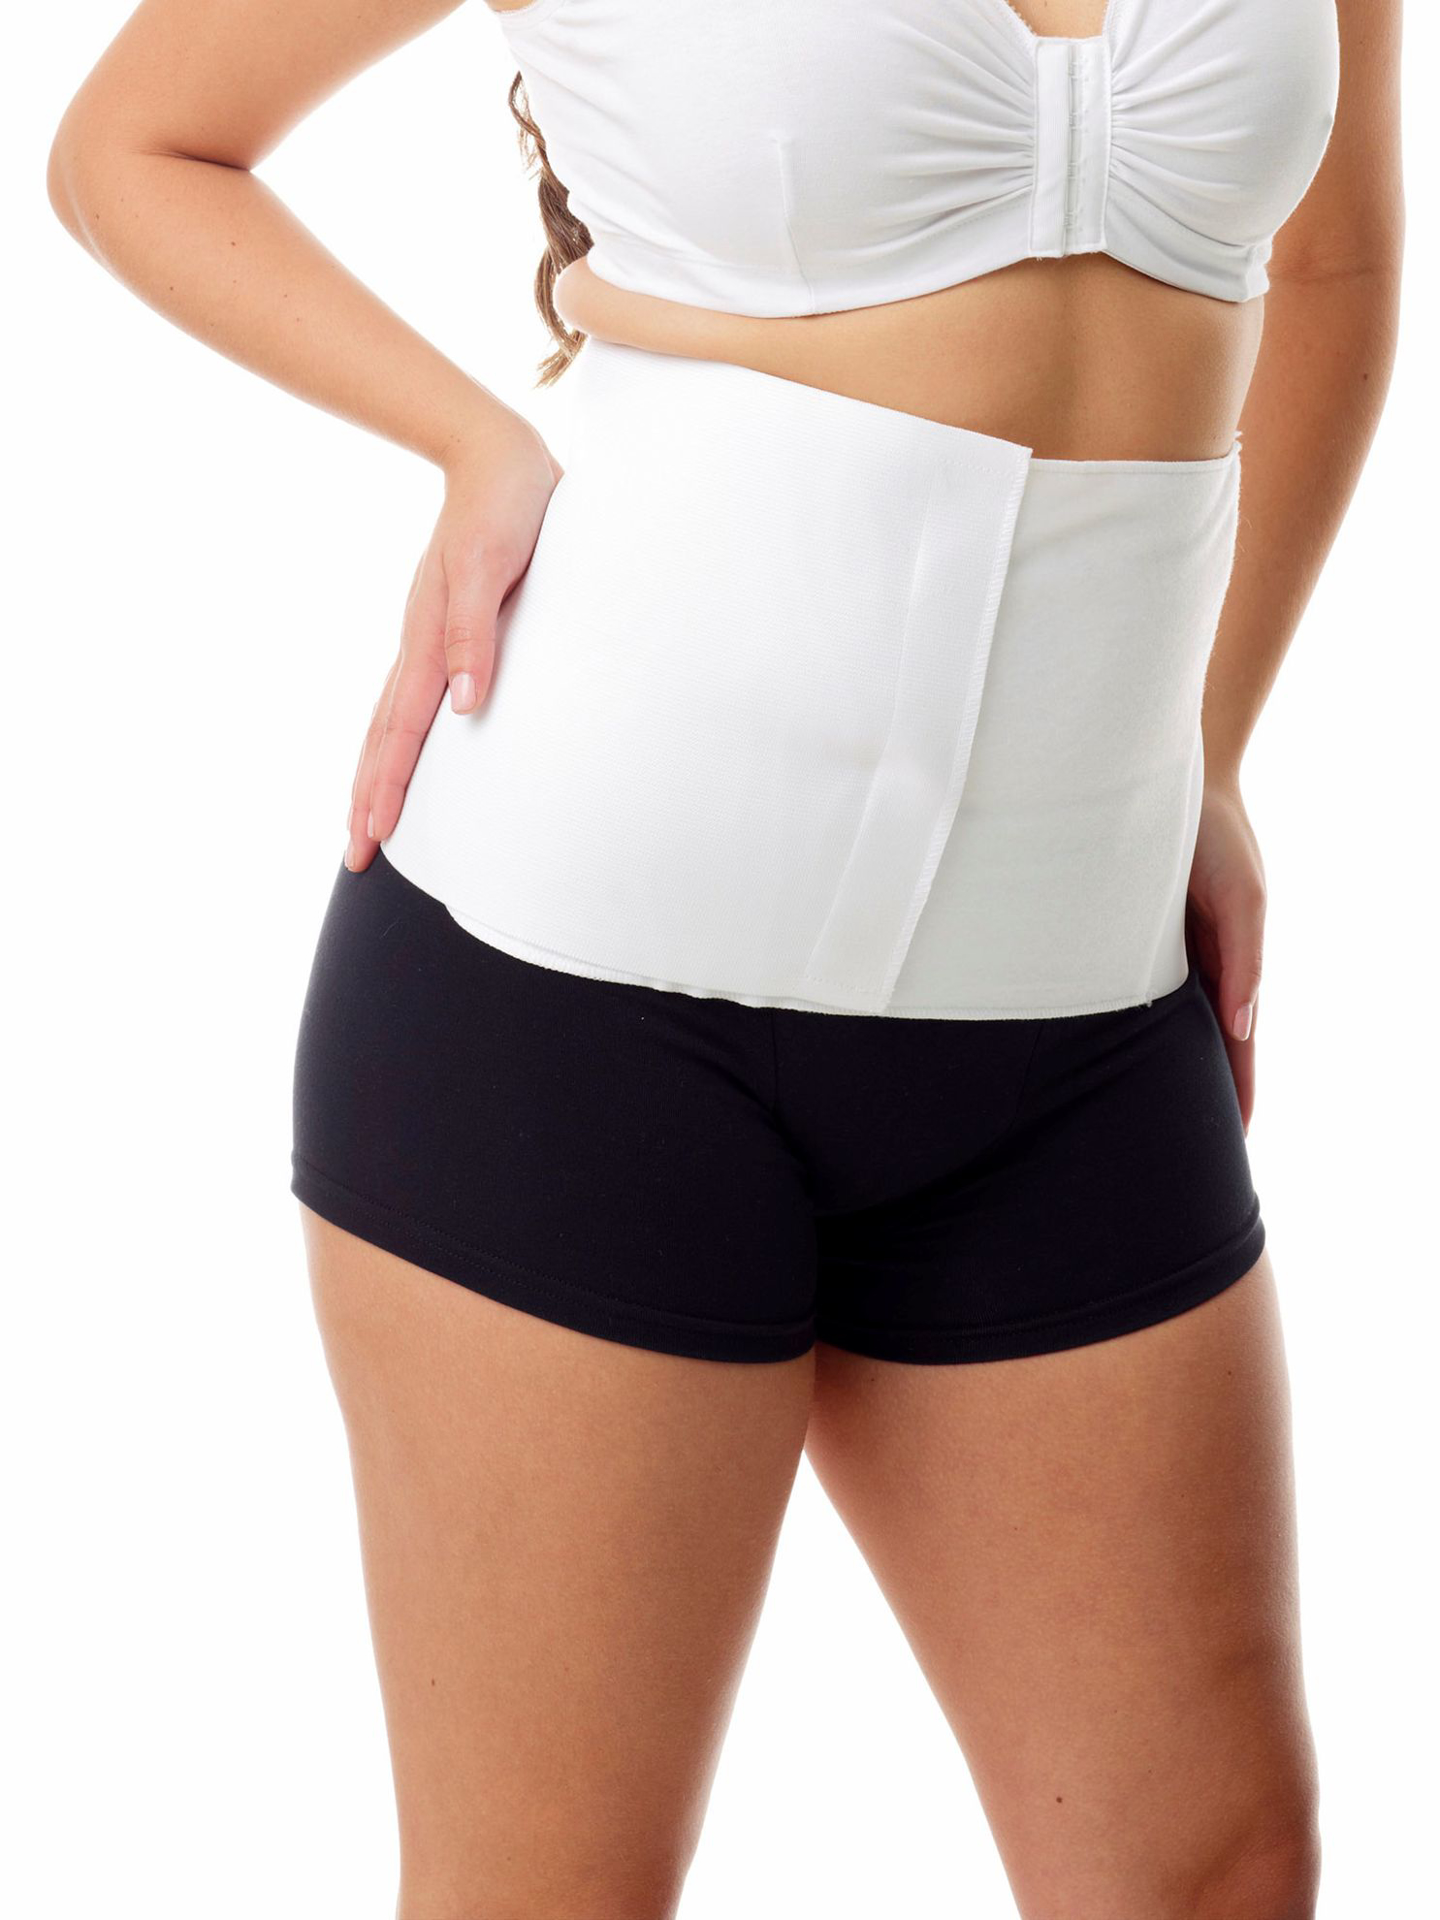 Post Delivery Abdominal Binder 9-inch with Velcro Closure. Men